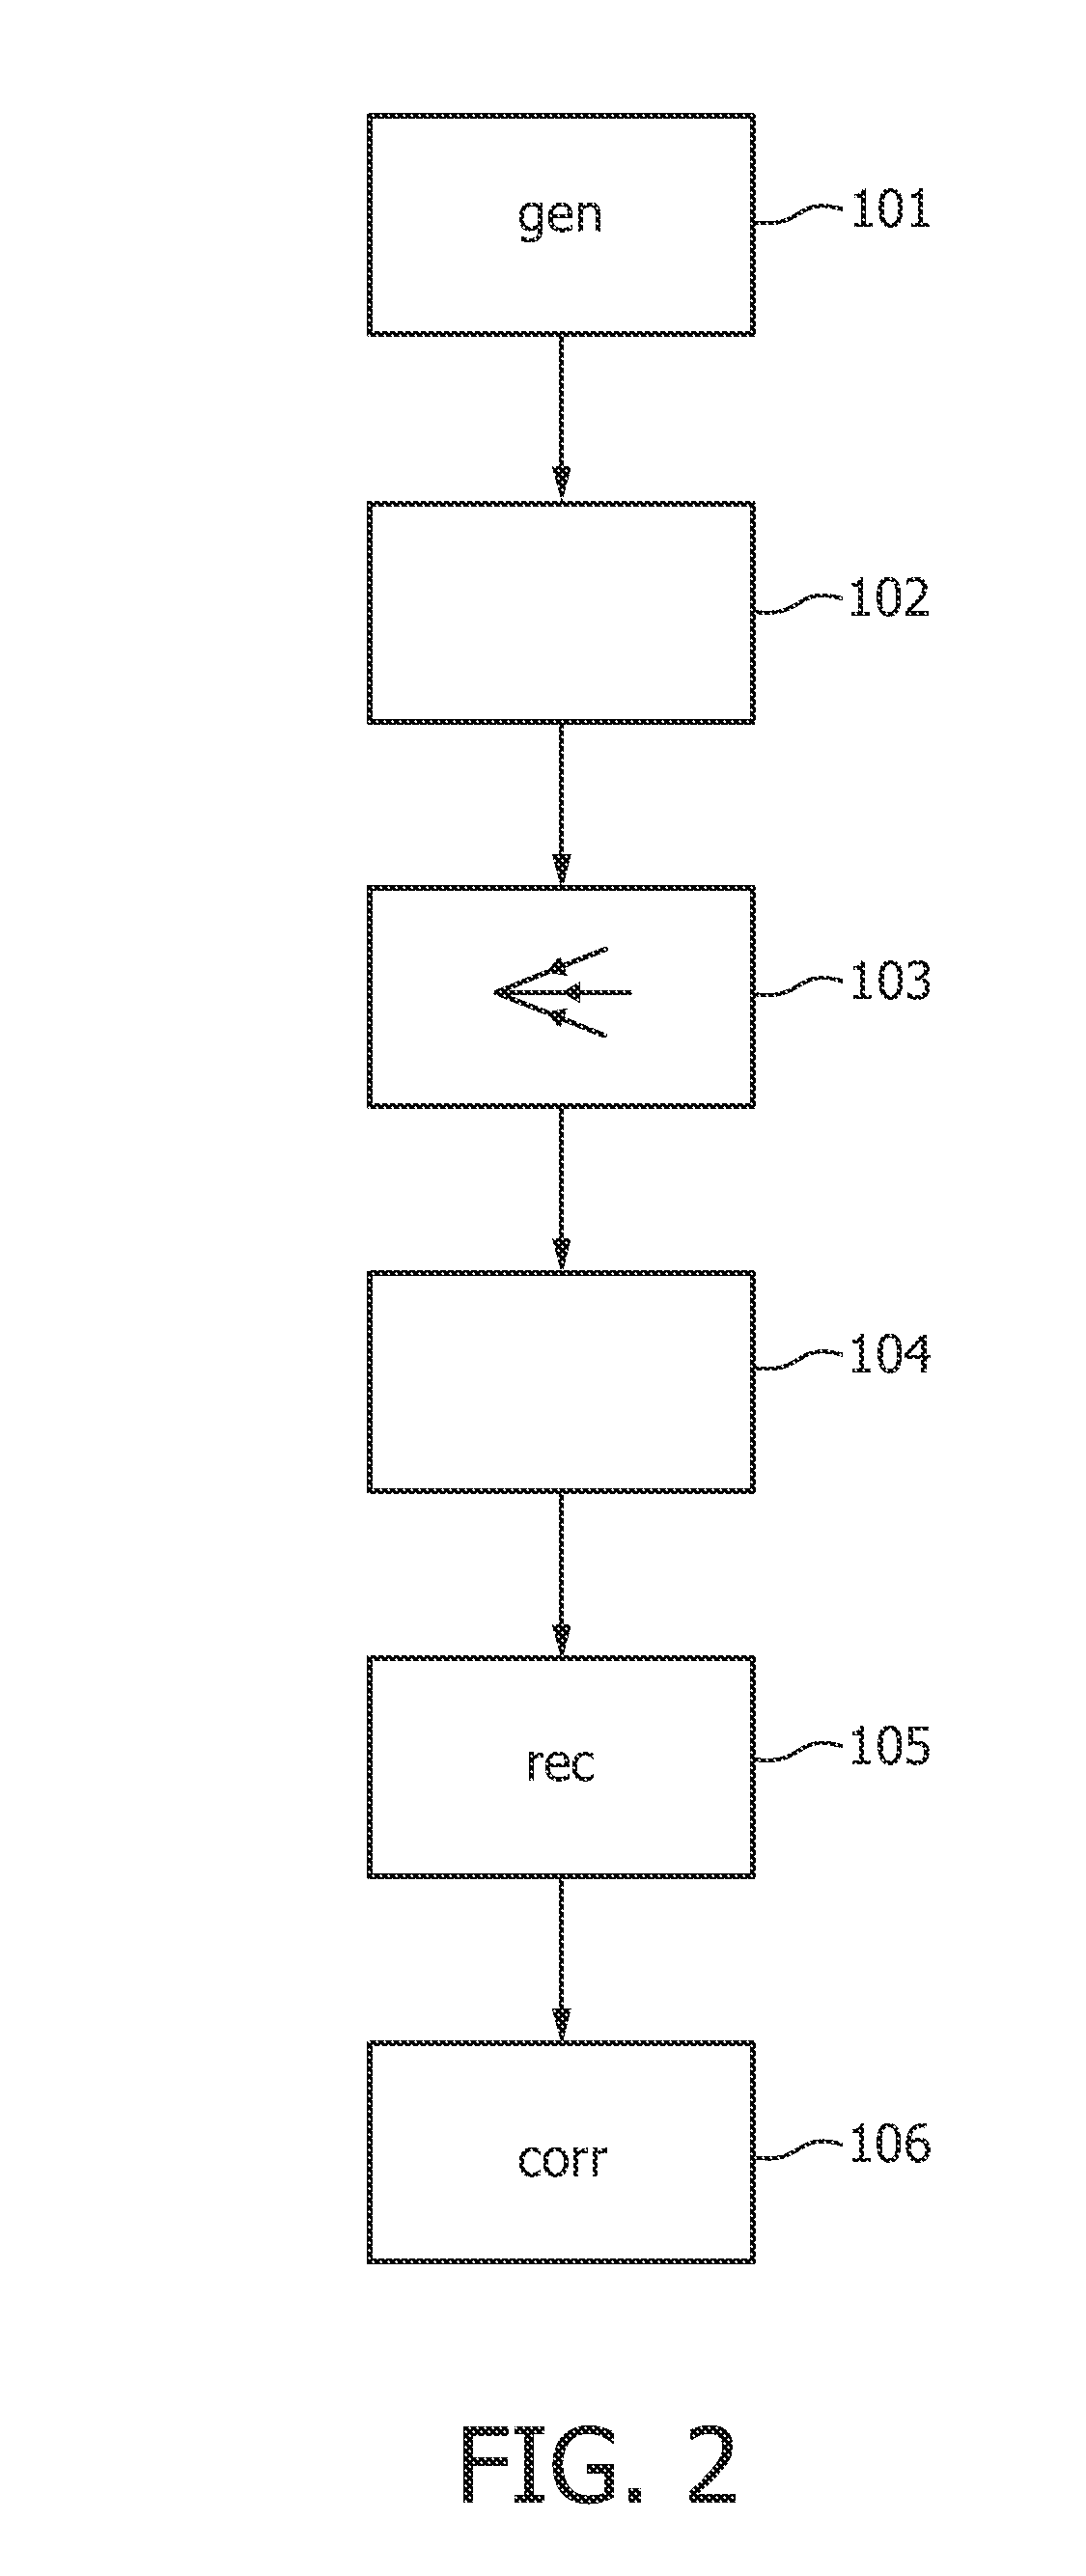 Apparatus for determining a high density region in an image